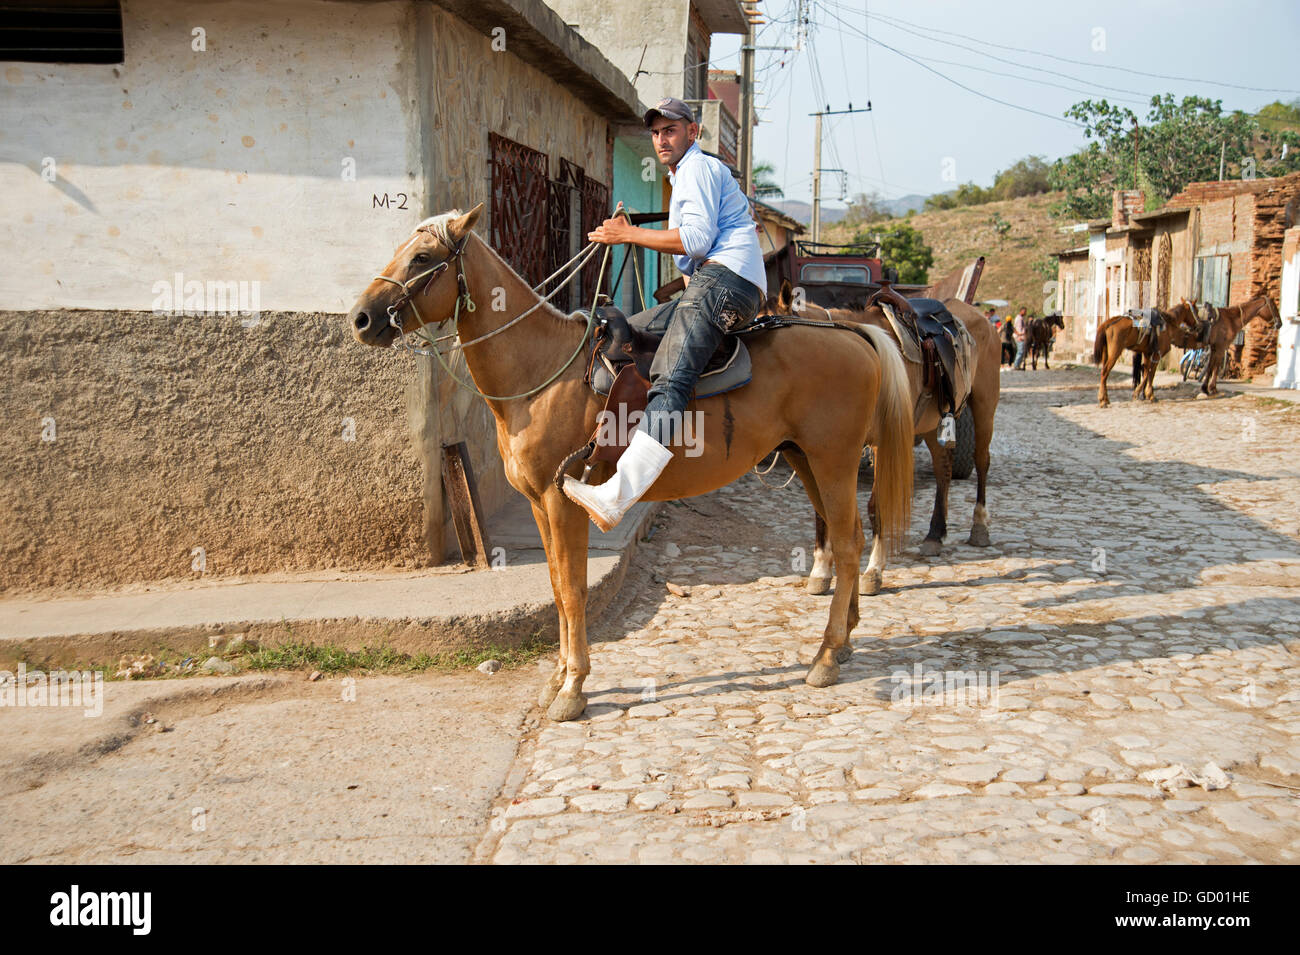 A Cuban guarjiro or cowboy taking his horses home after taking tourist on horseback tour of the countryside in Trinidad Cuba Stock Photo